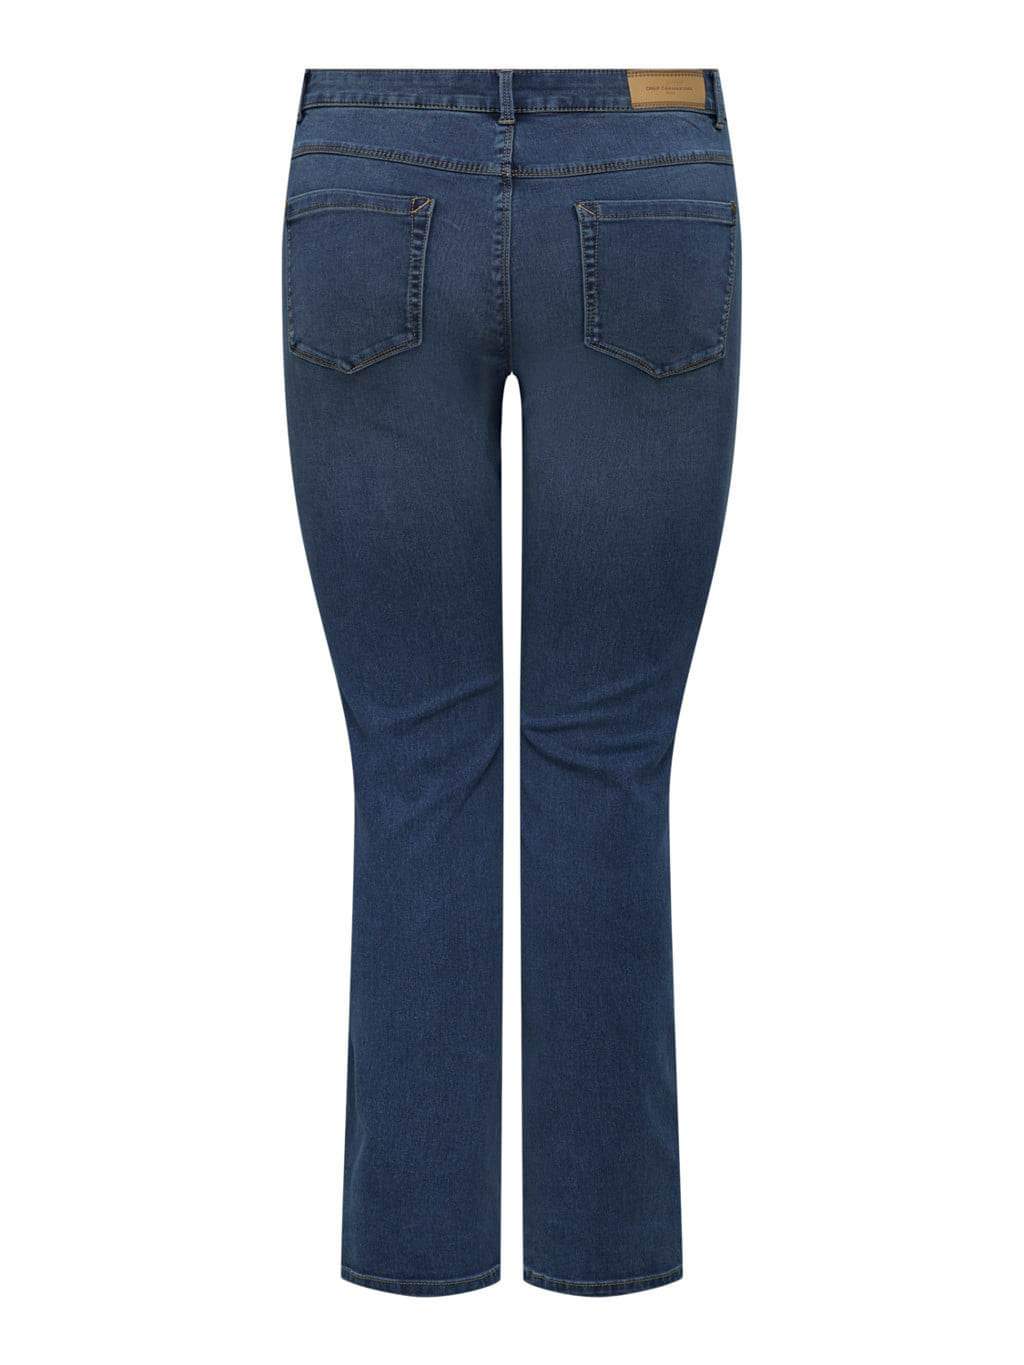 CARAUGUSTA STRAIGHT FIT JEANS